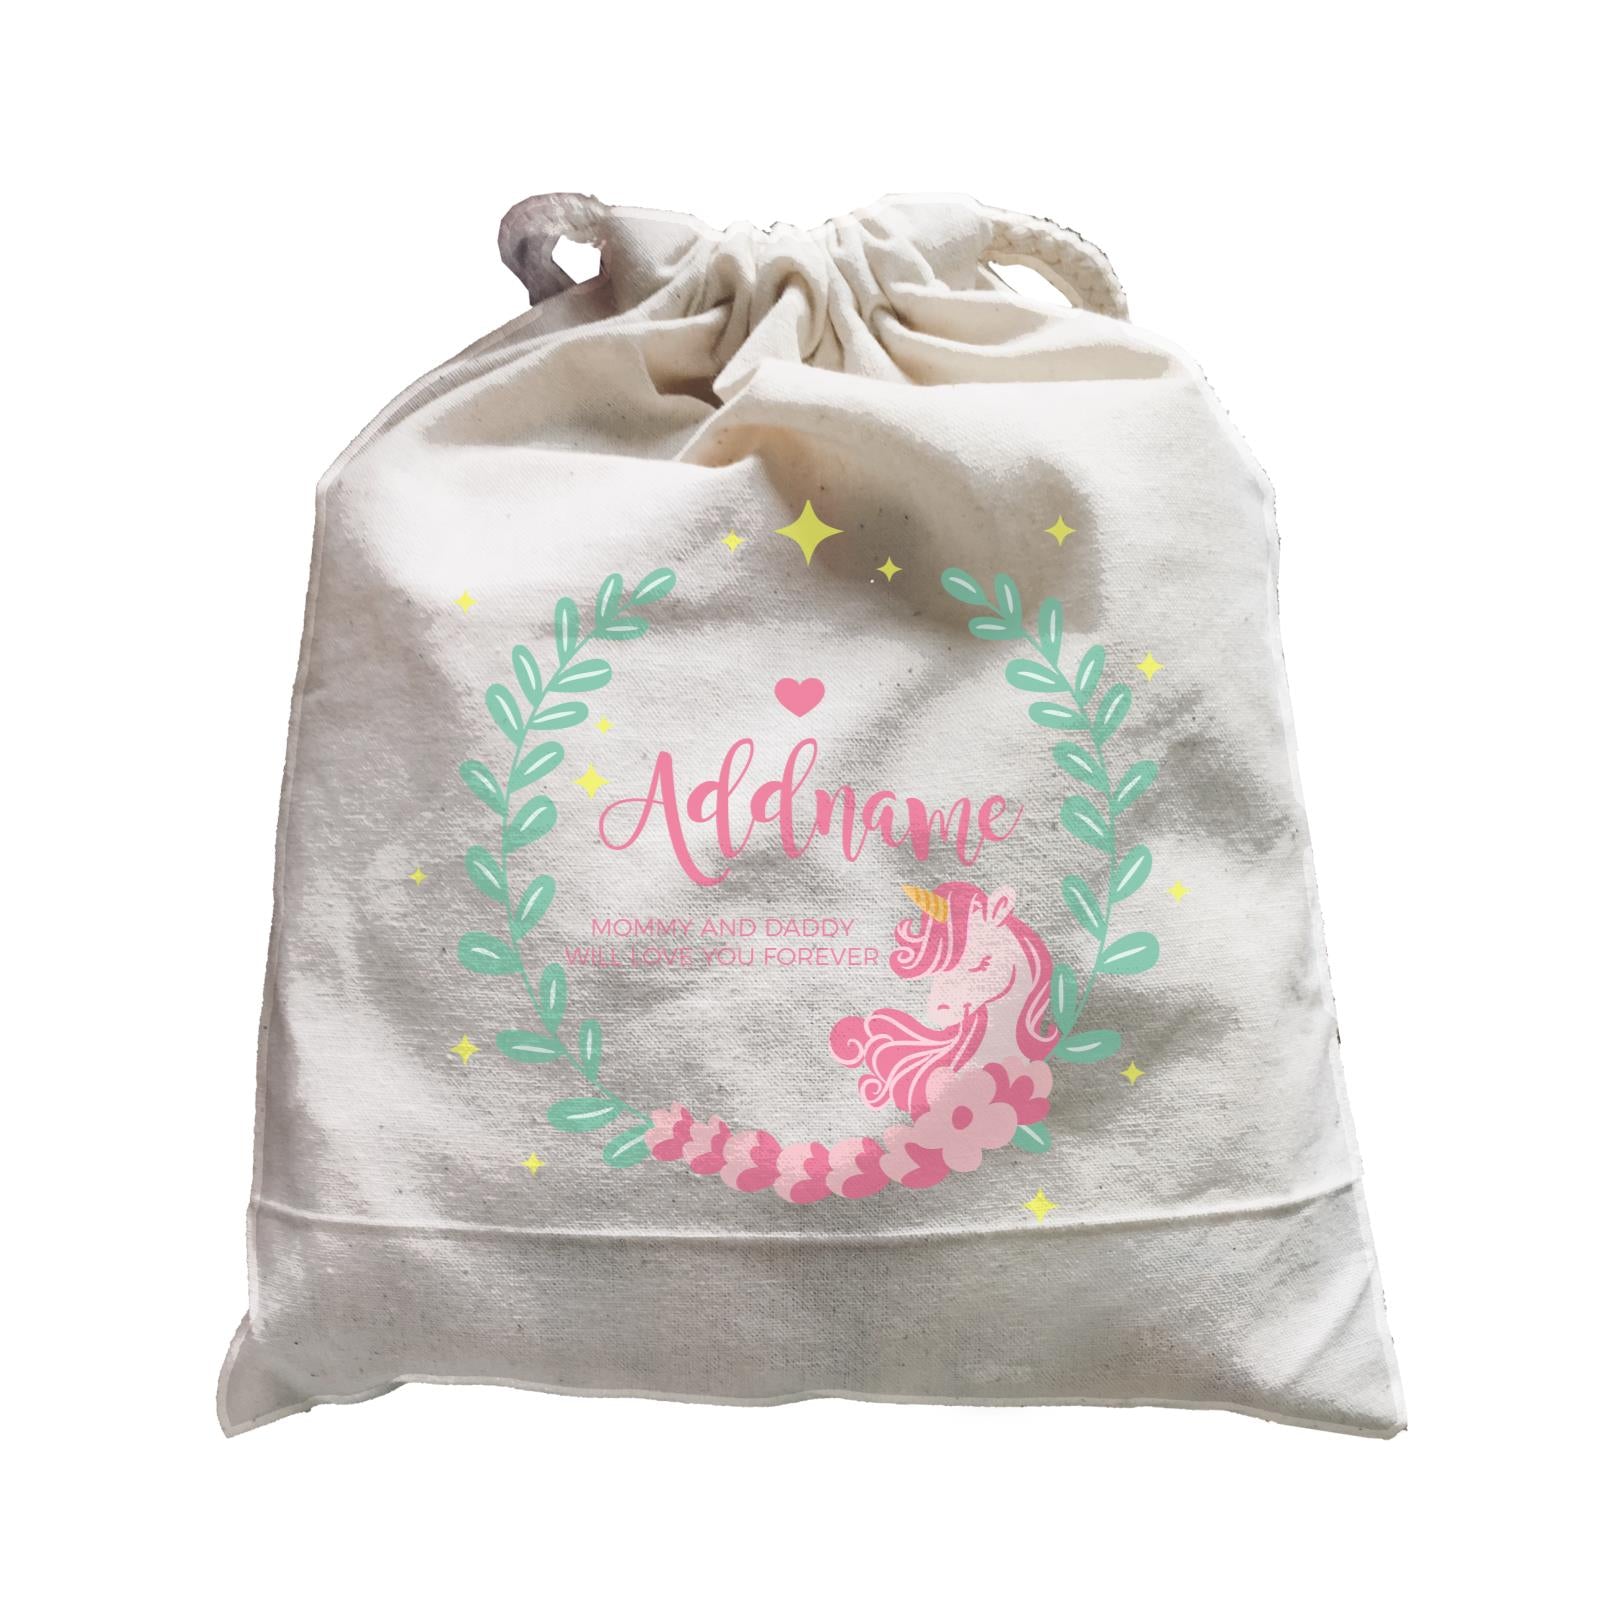 Cute Pink Unicorn with Pastel Green Leaves Wreath Personalizable iwth Name and Text Satchel